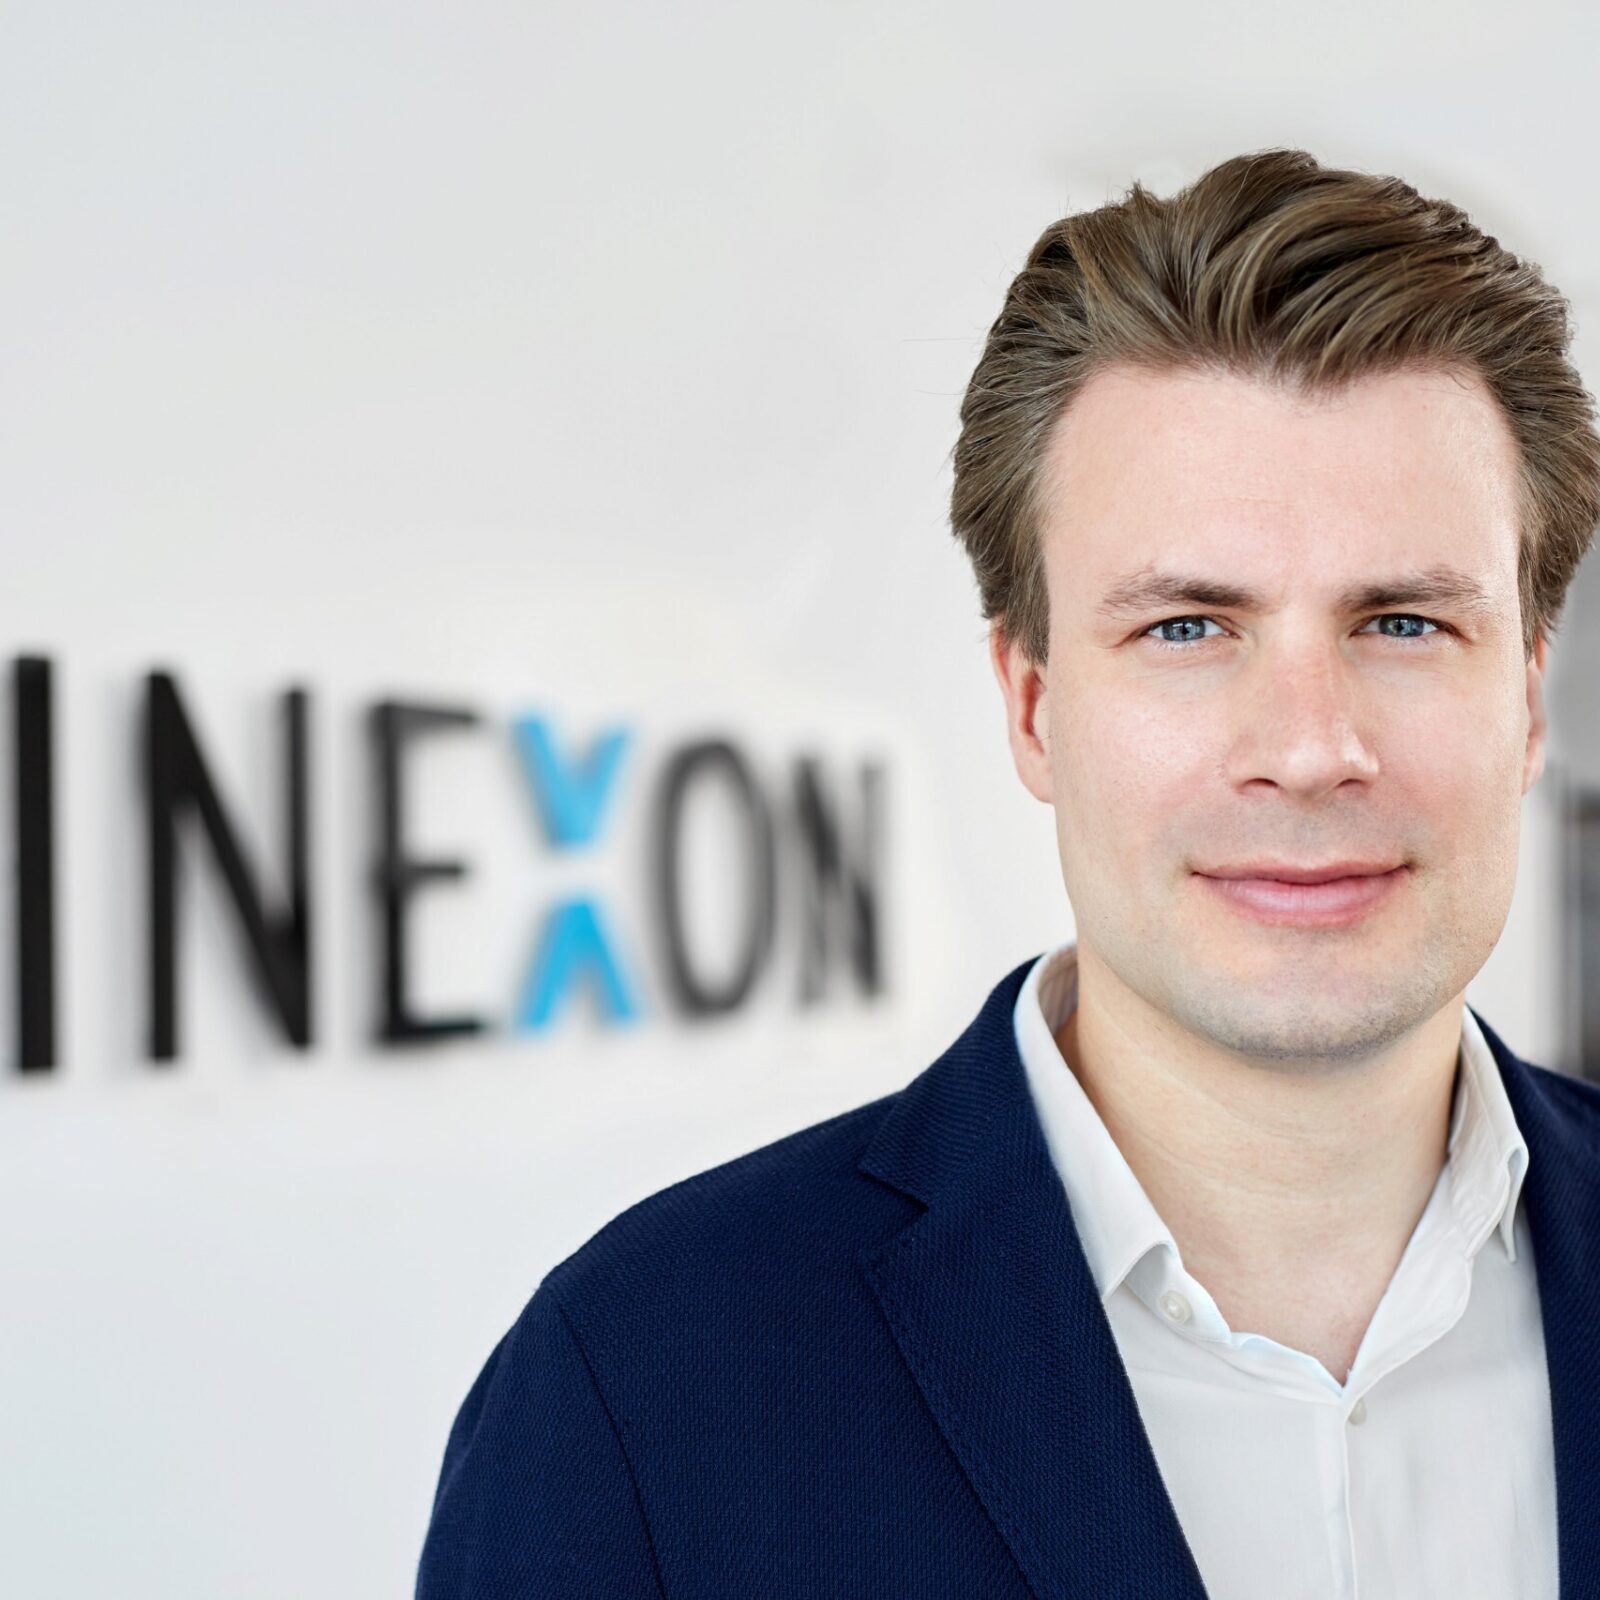 Dr. Alex Hüttenbrink is one of the co-founders of KINEXON Sports, which is the global leader in providing sports data and analytics to the NBA, NCAA, and European soccer, handball, and hockey leagues.